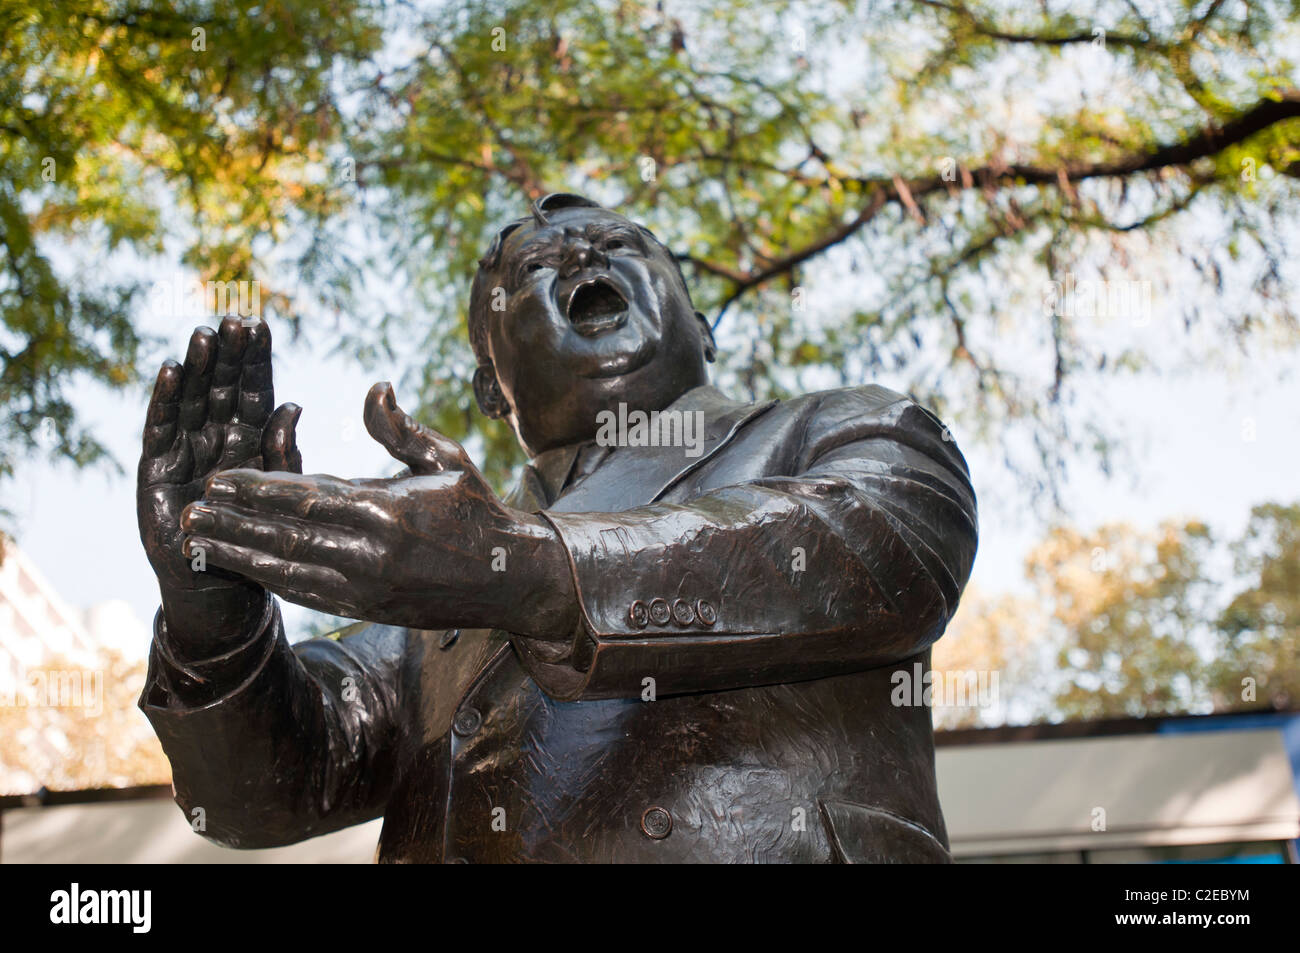 Metal statue of Fiorello Henry LaGuardia clapping hands, Laguardia Place, New York City, USA Stock Photo